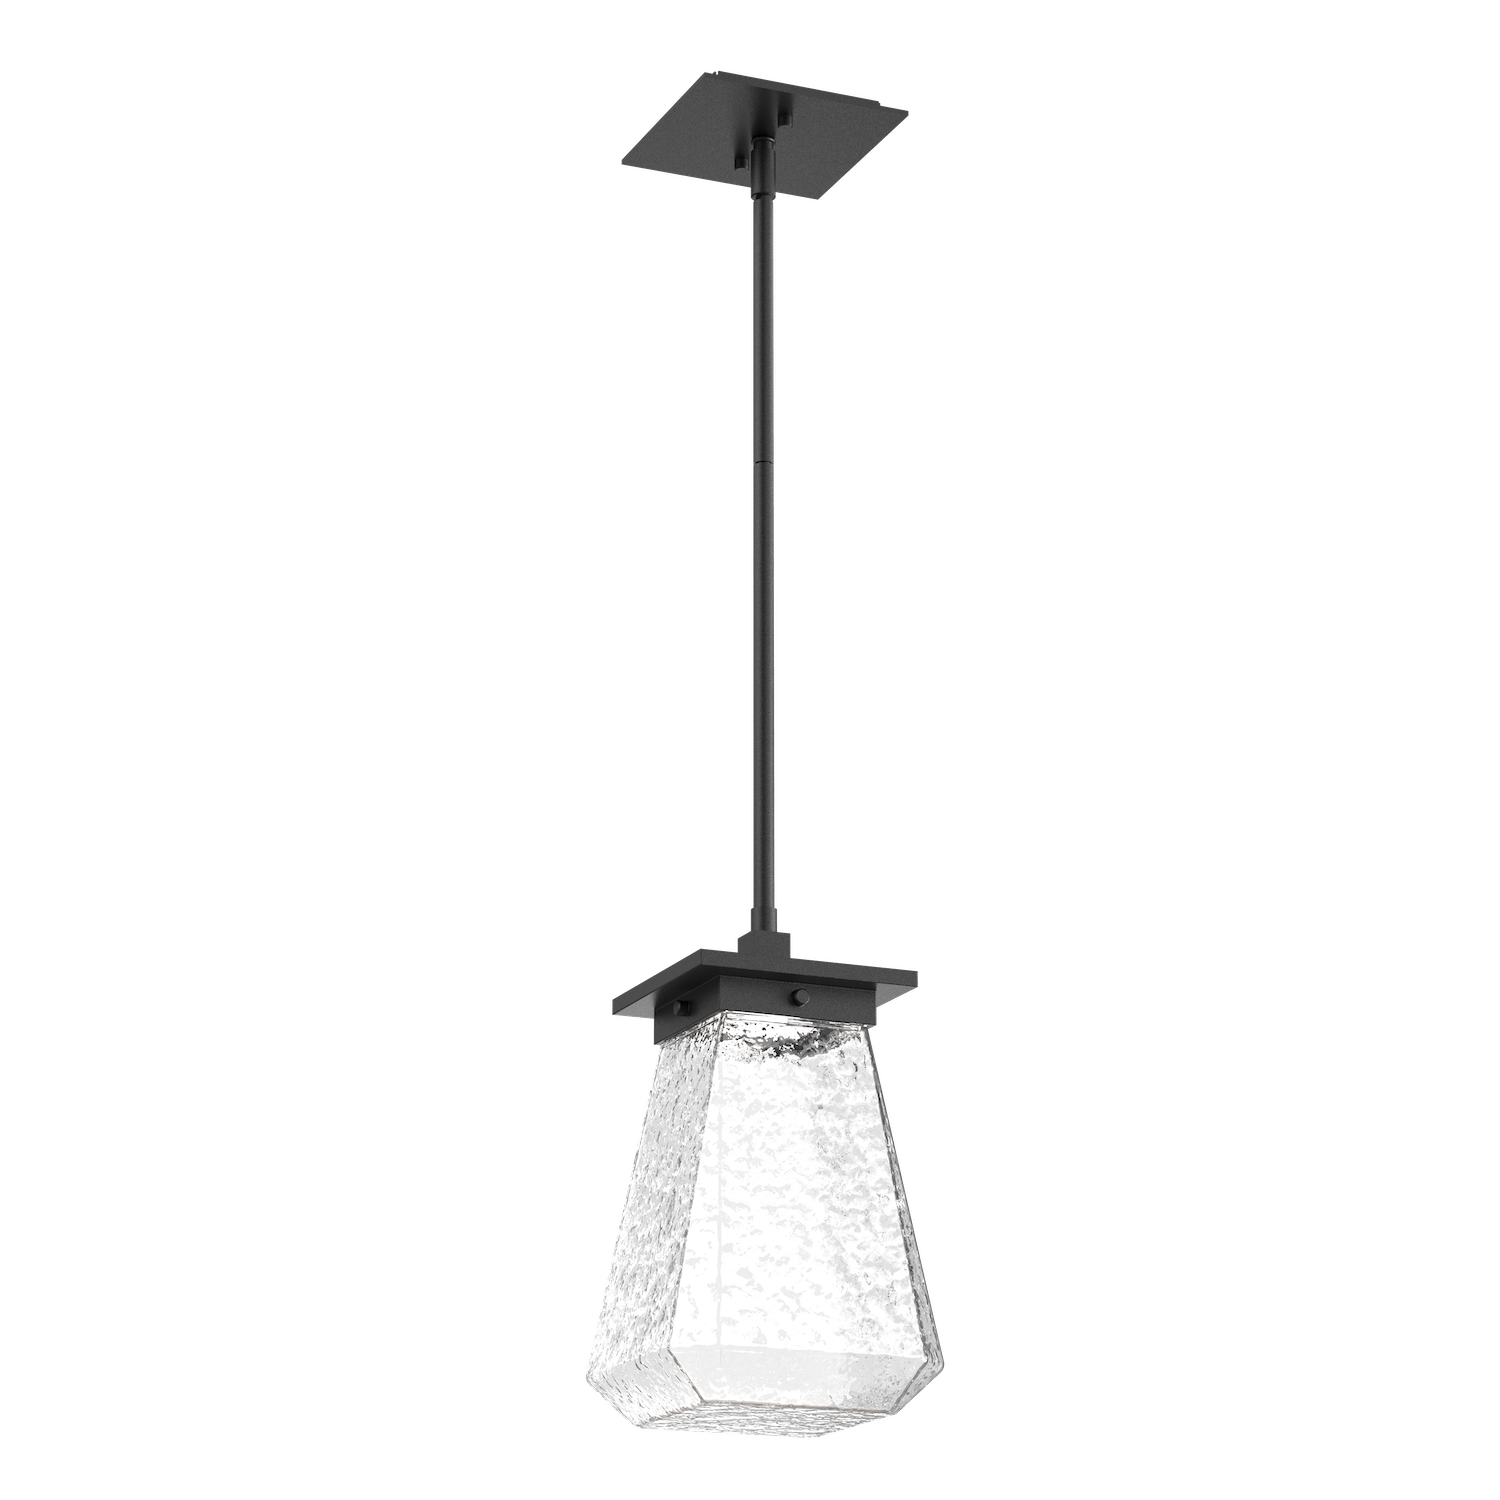 OPB0043-AH-TB-C-Hammerton-Studio-Beacon-14-inch-outdoor-pendant-light-with-textured-black-finish-and-clear-blown-glass-shades-and-LED-lamping